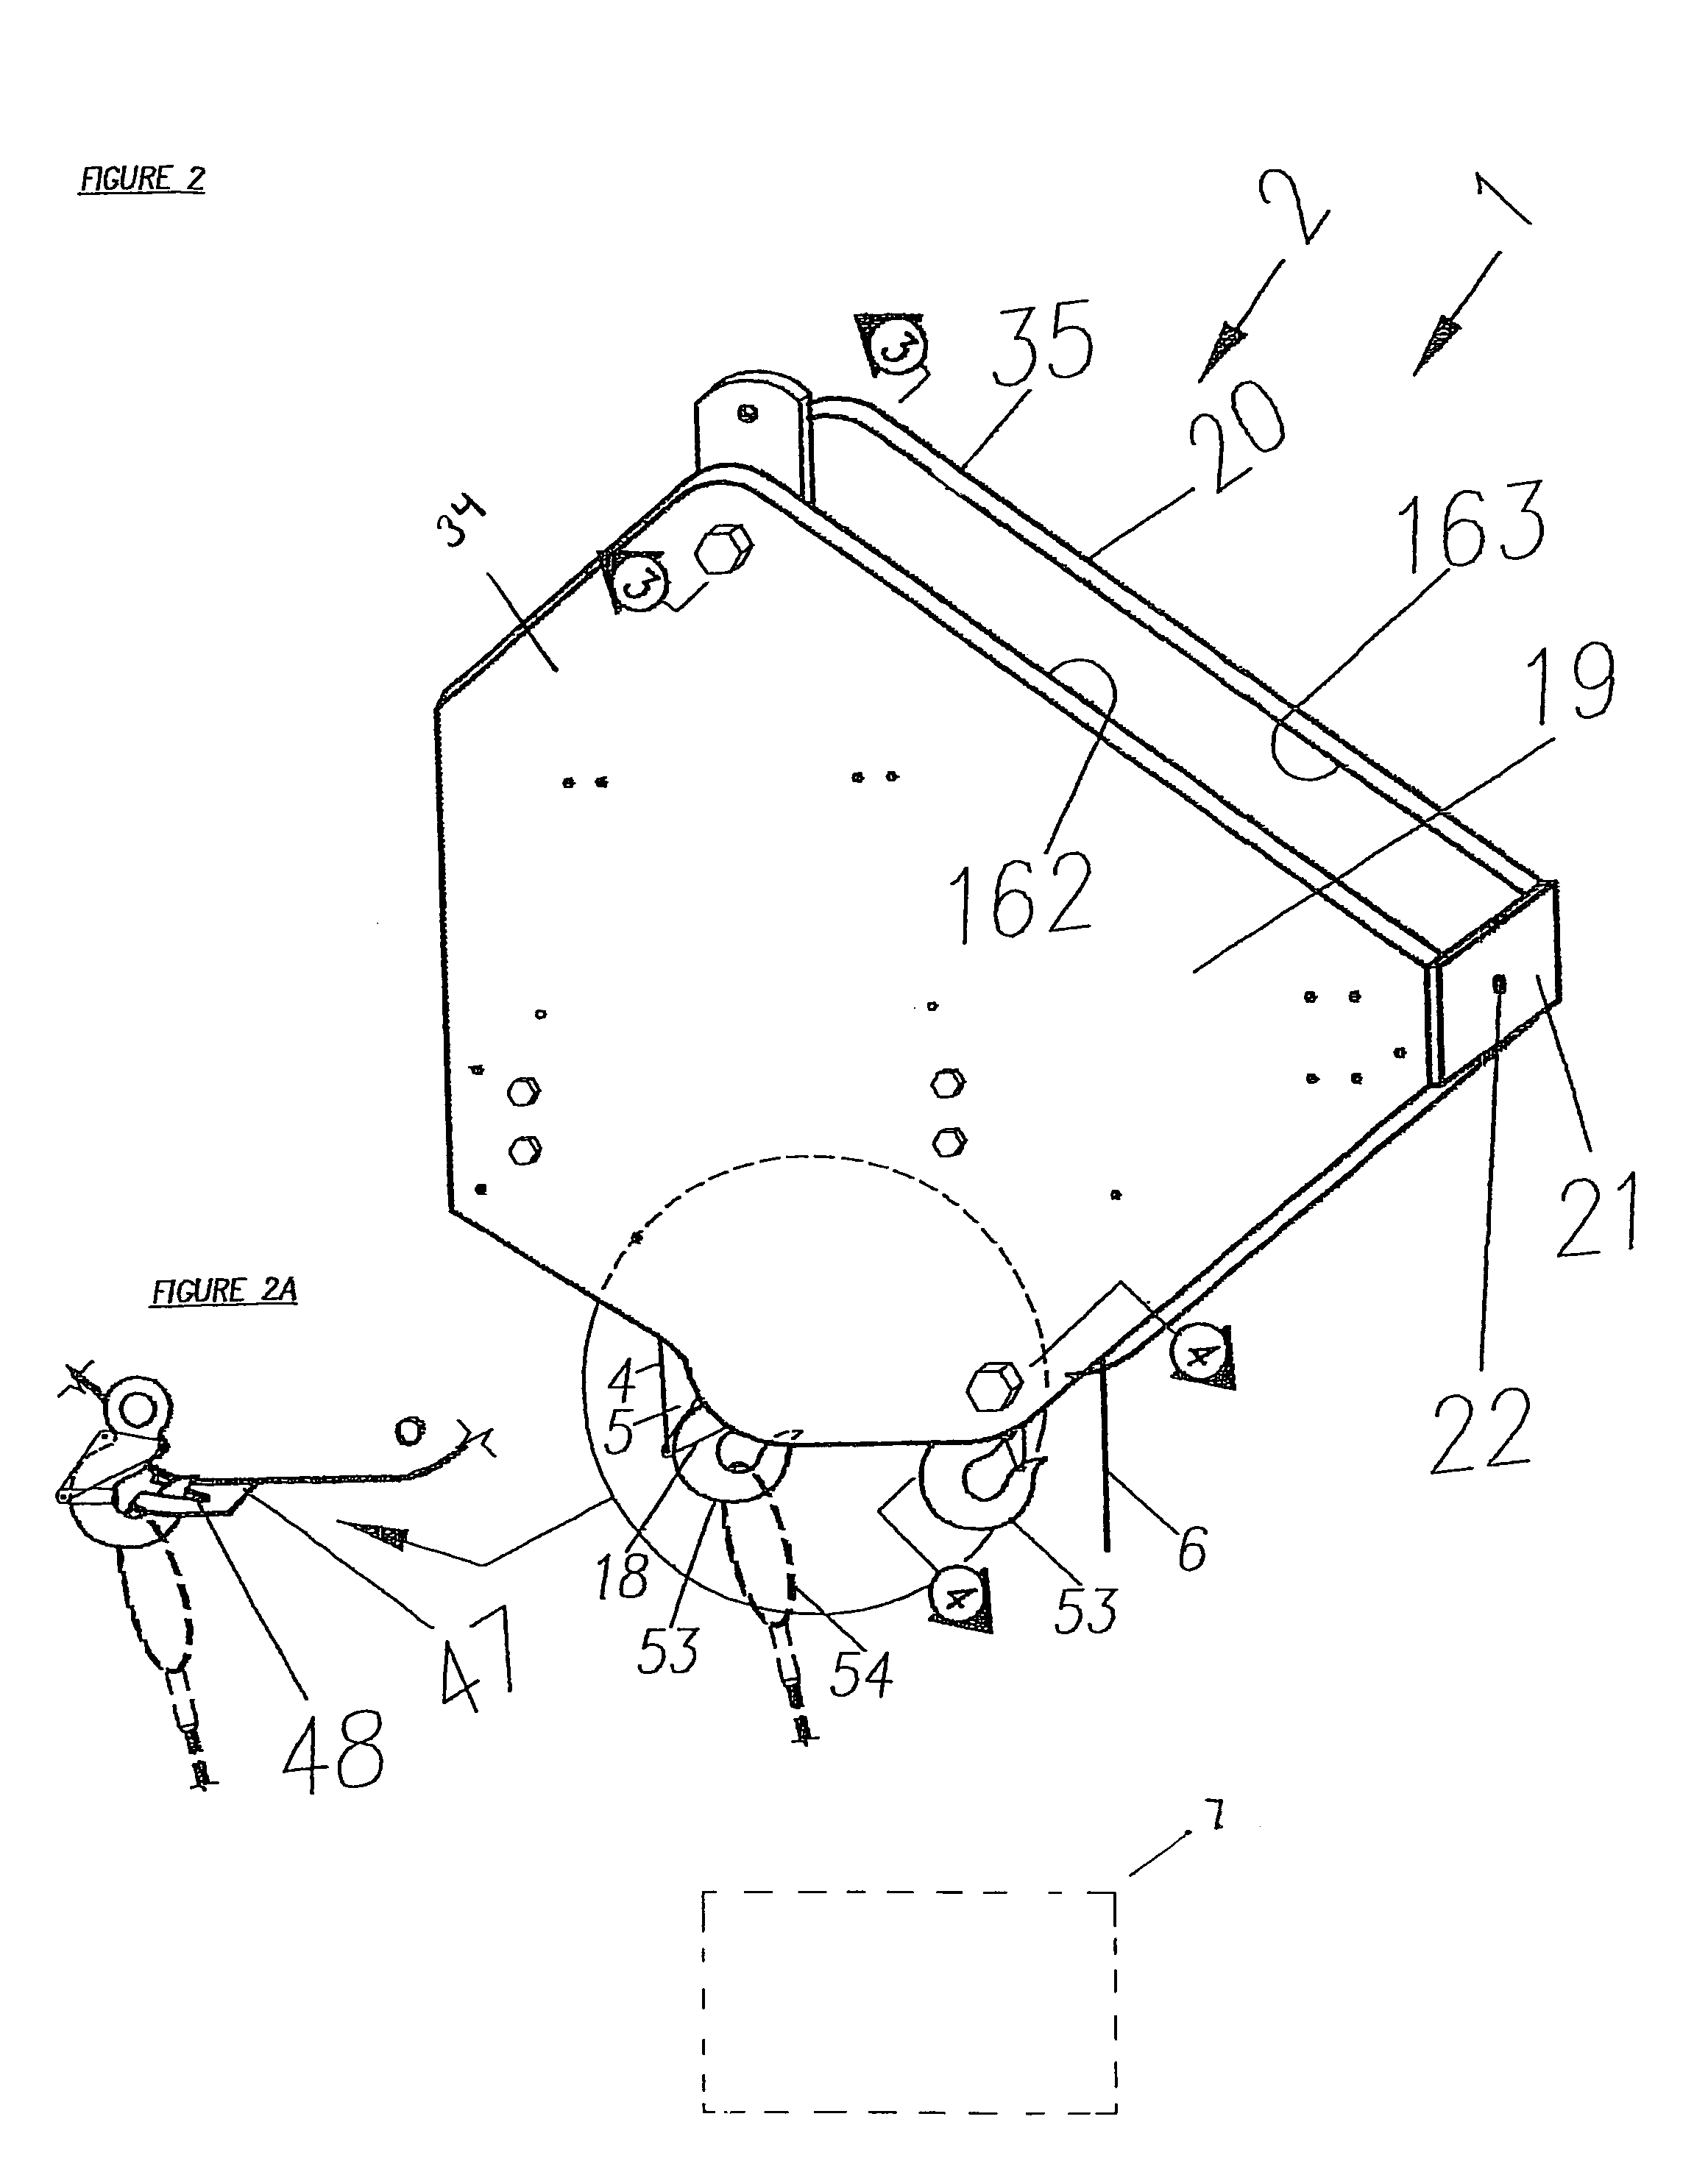 Apparatus for the latching and unlatching of a load